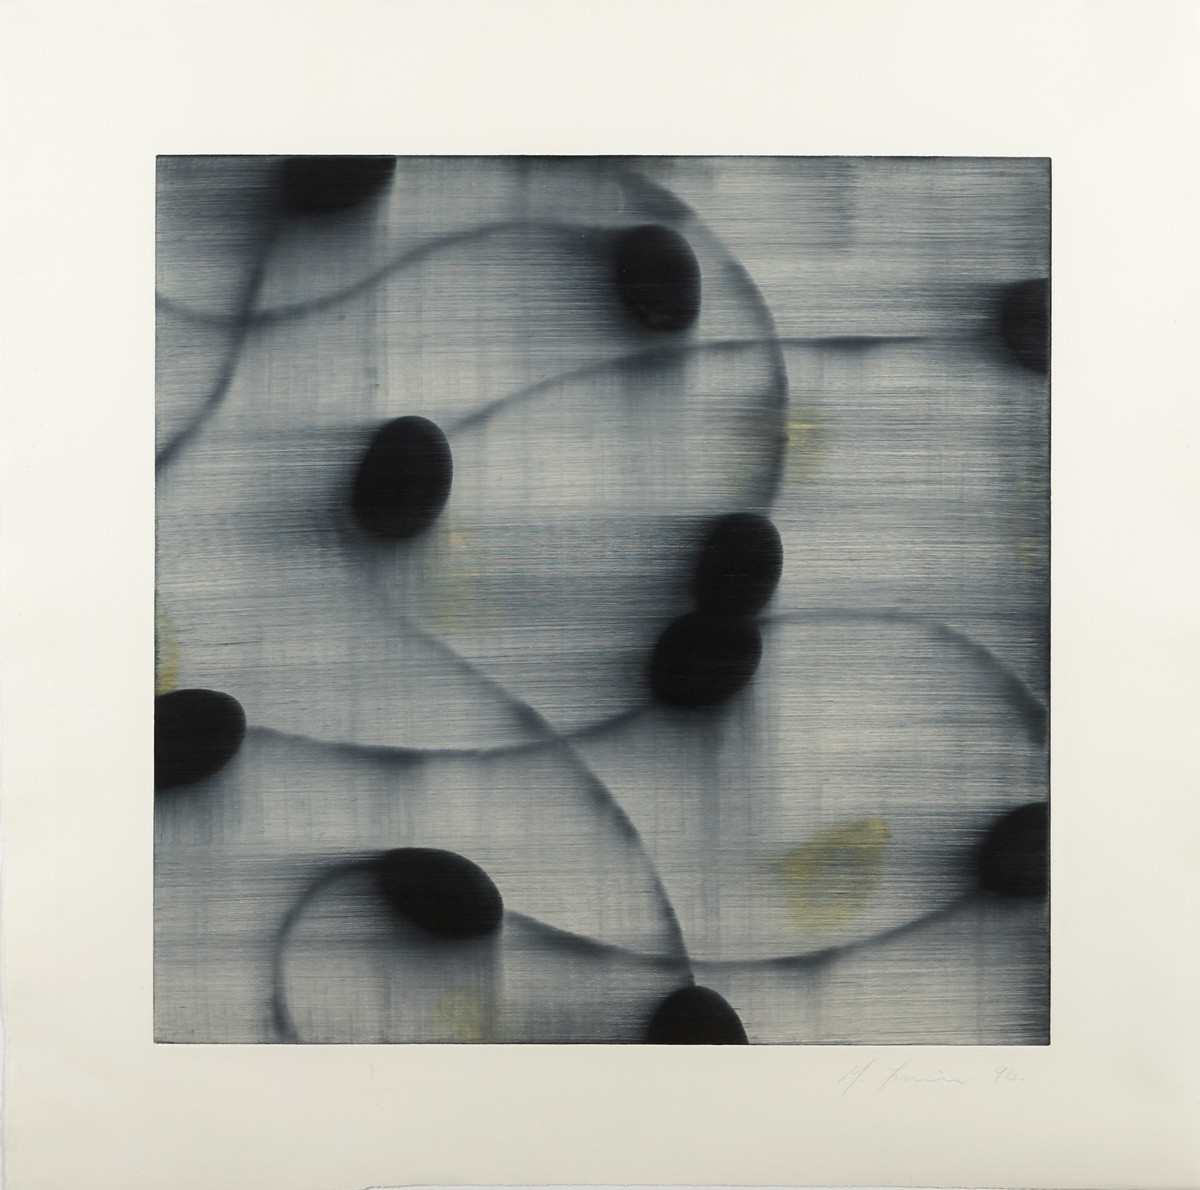 UNTITLED, 1994 by Mark Francis (b.1962) at Whyte's Auctions